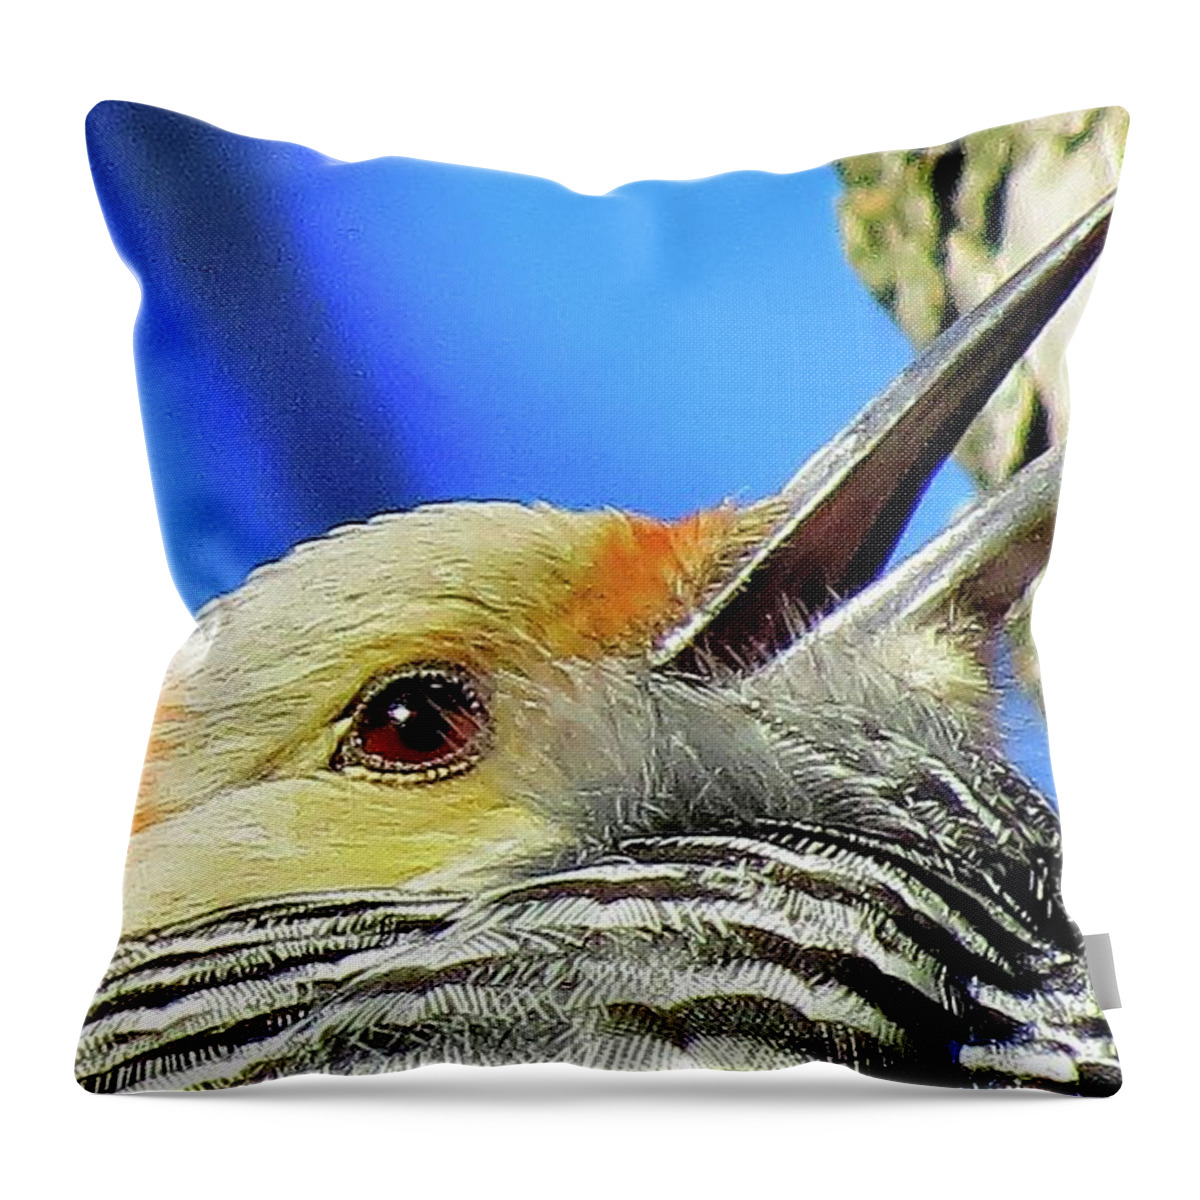 Woodpeckers Throw Pillow featuring the photograph Female Red-bellied Woodpecker Close Up by Linda Stern